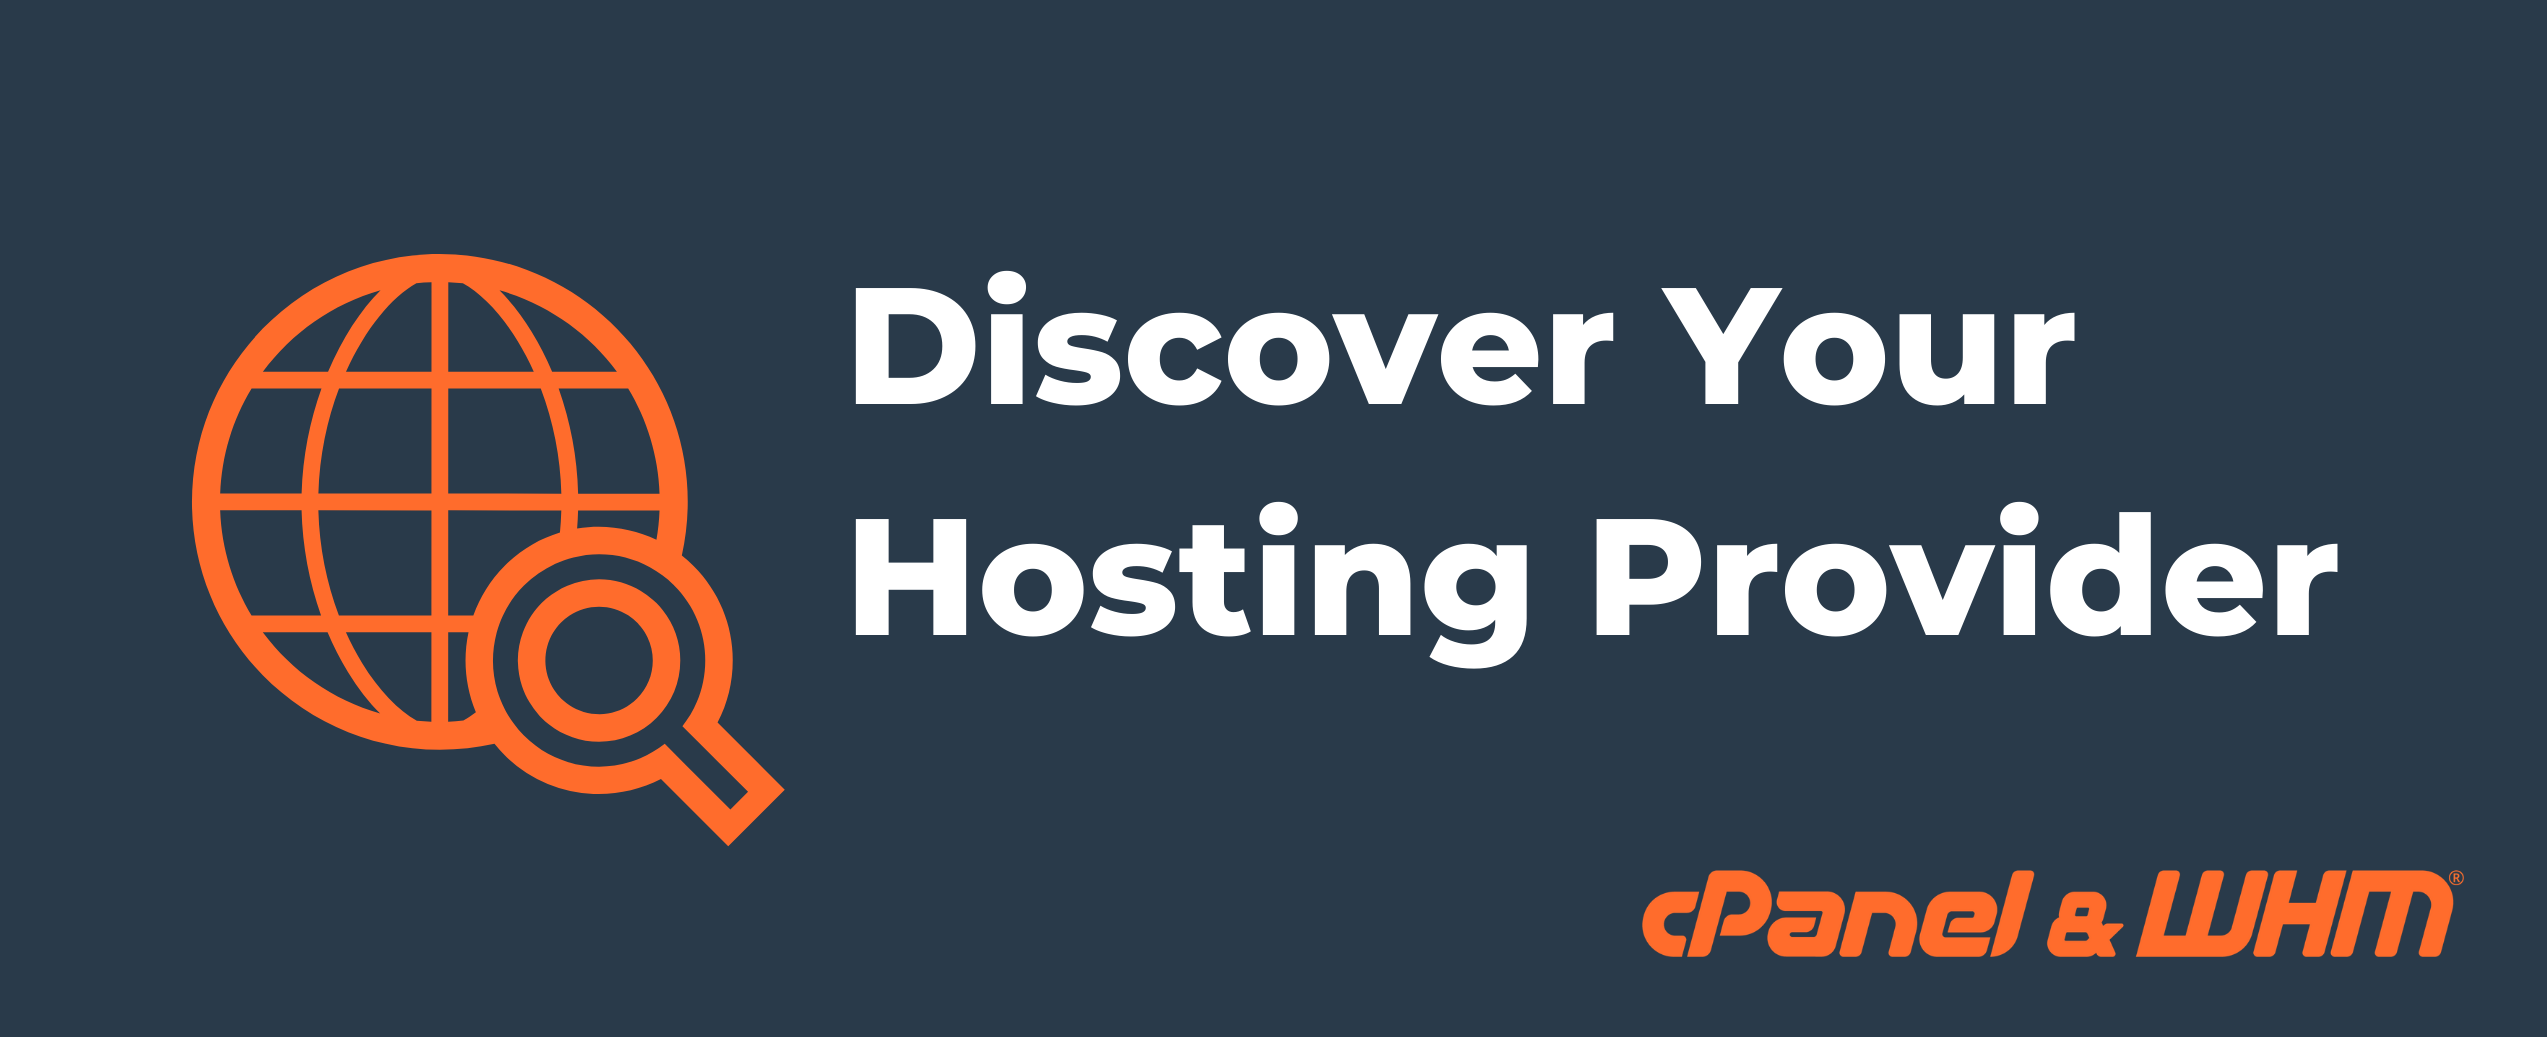 discover your hosting provider with cPanel & WHM